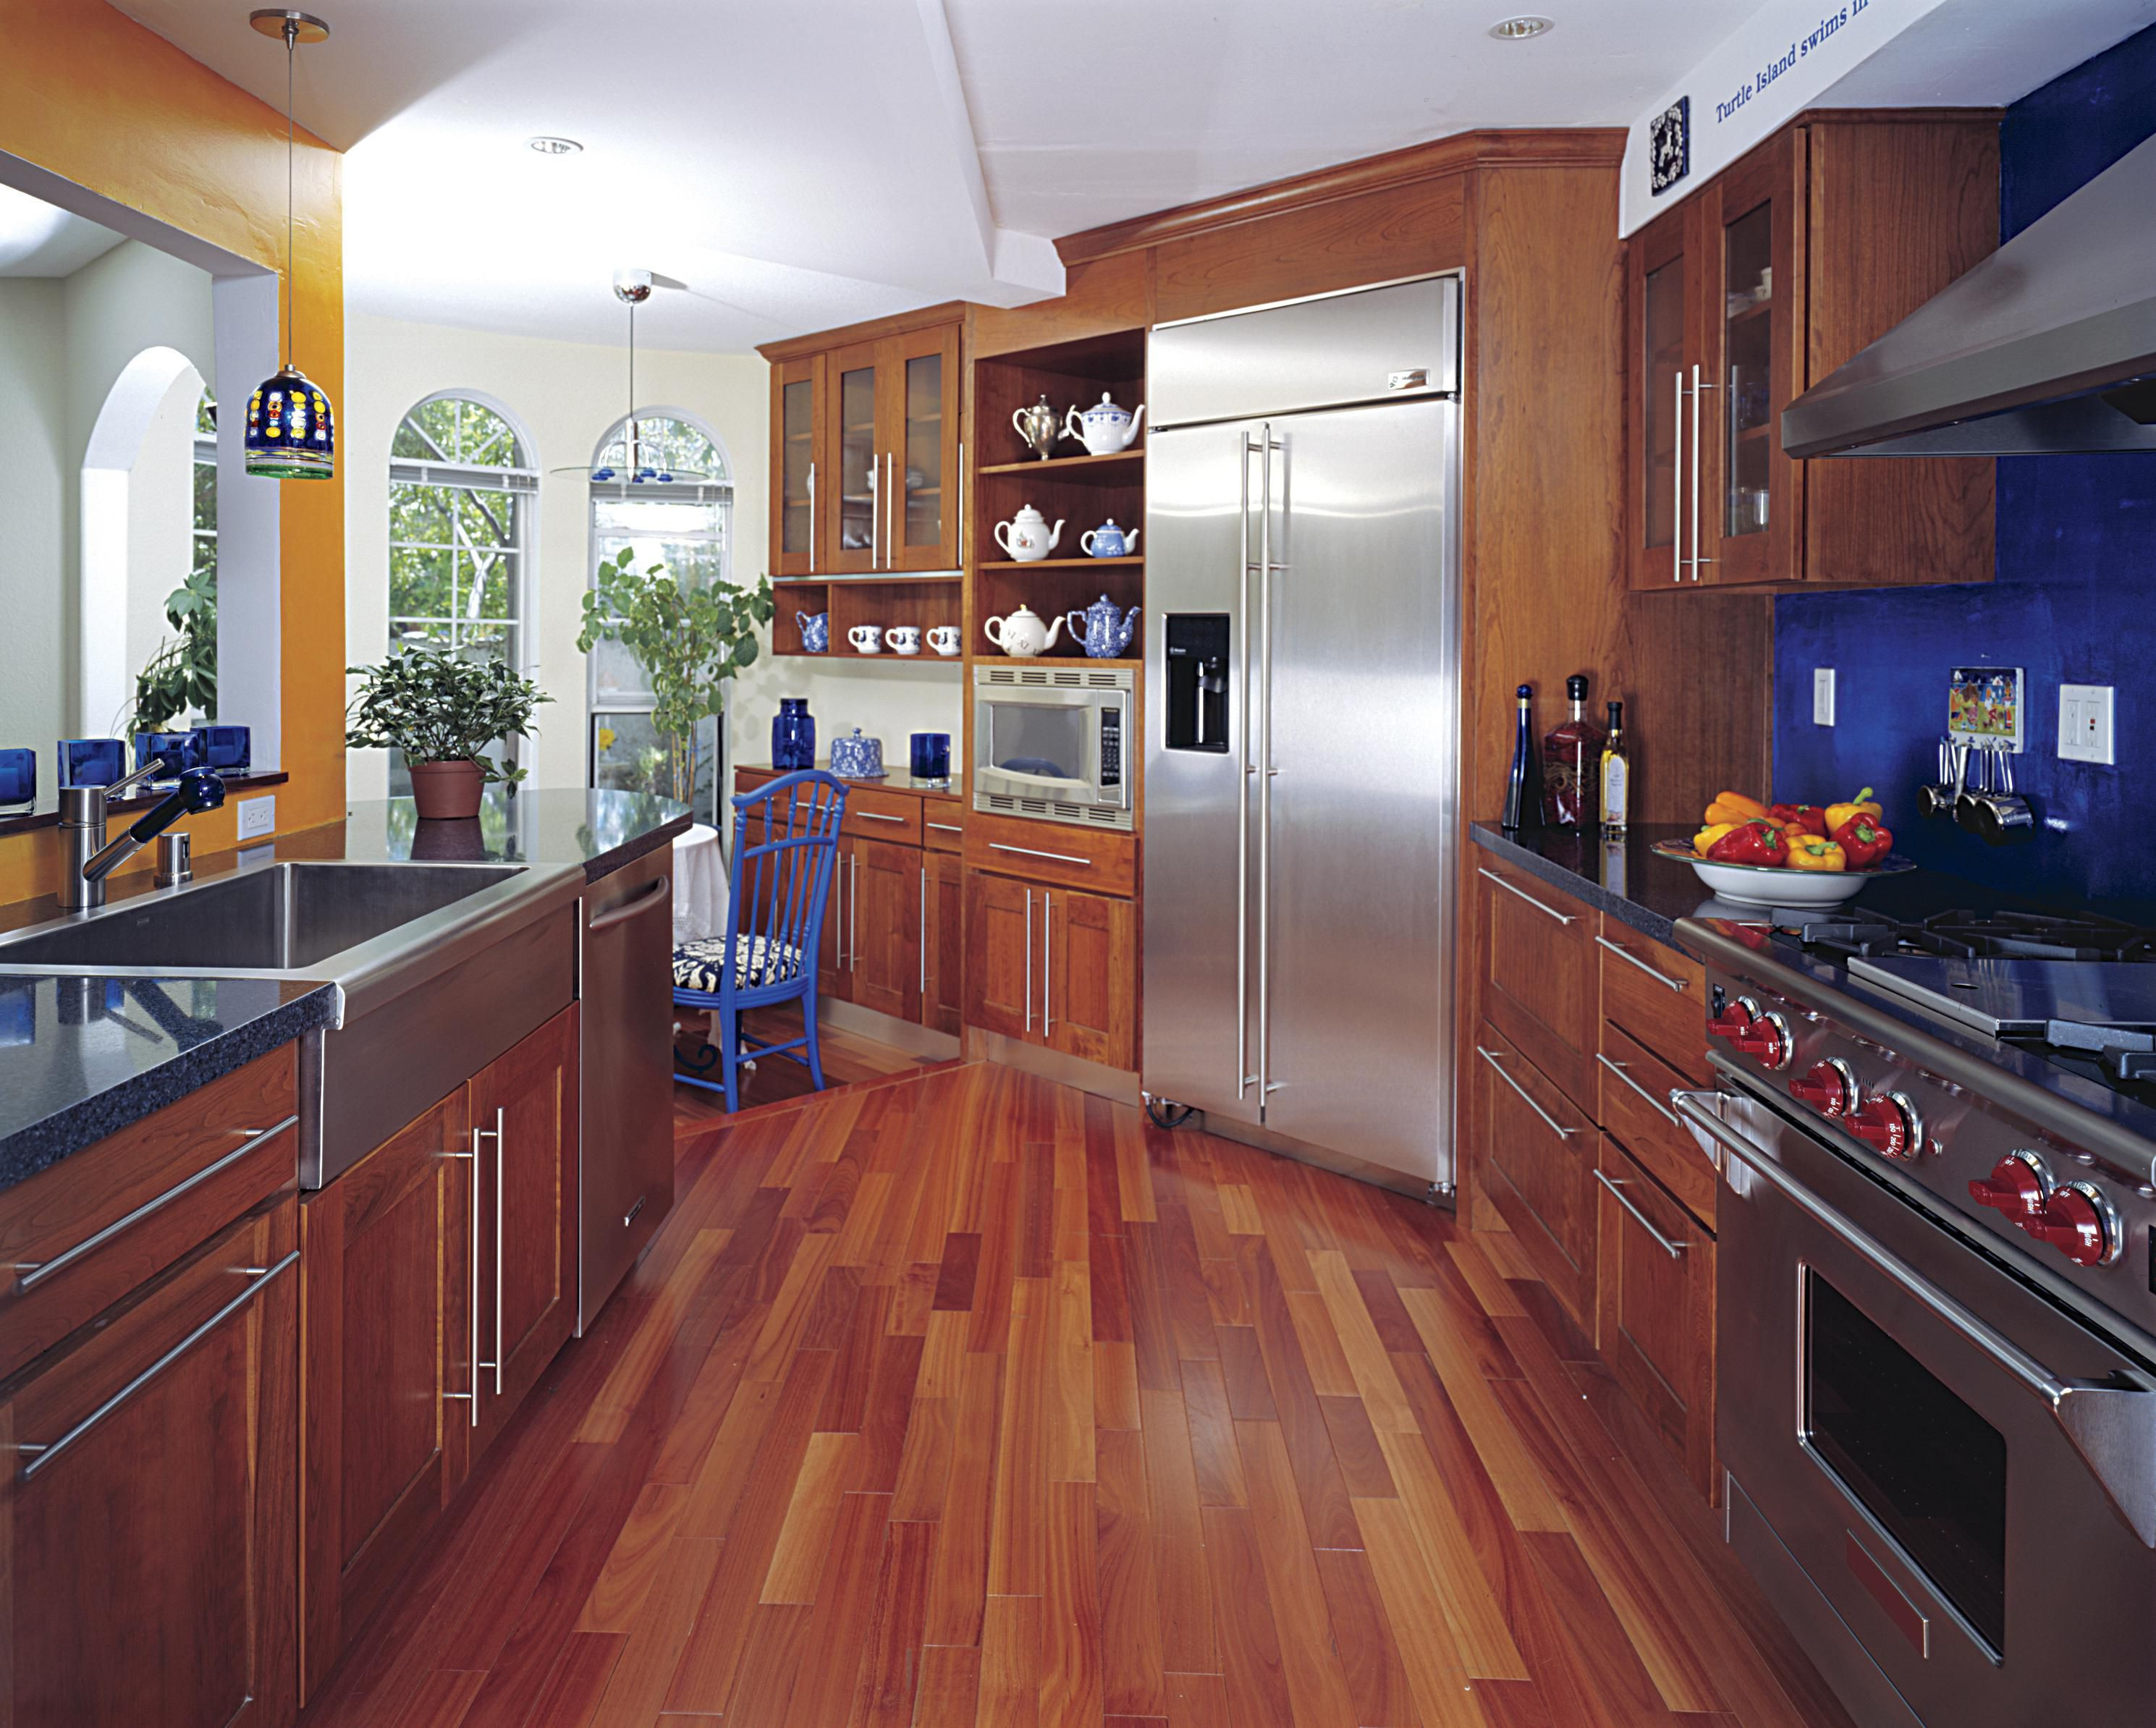 26 Lovable Dark Hardwood Floor Ideas 2024 free download dark hardwood floor ideas of hardwood floor in a kitchen is this allowed pertaining to 186828472 56a49f3a5f9b58b7d0d7e142